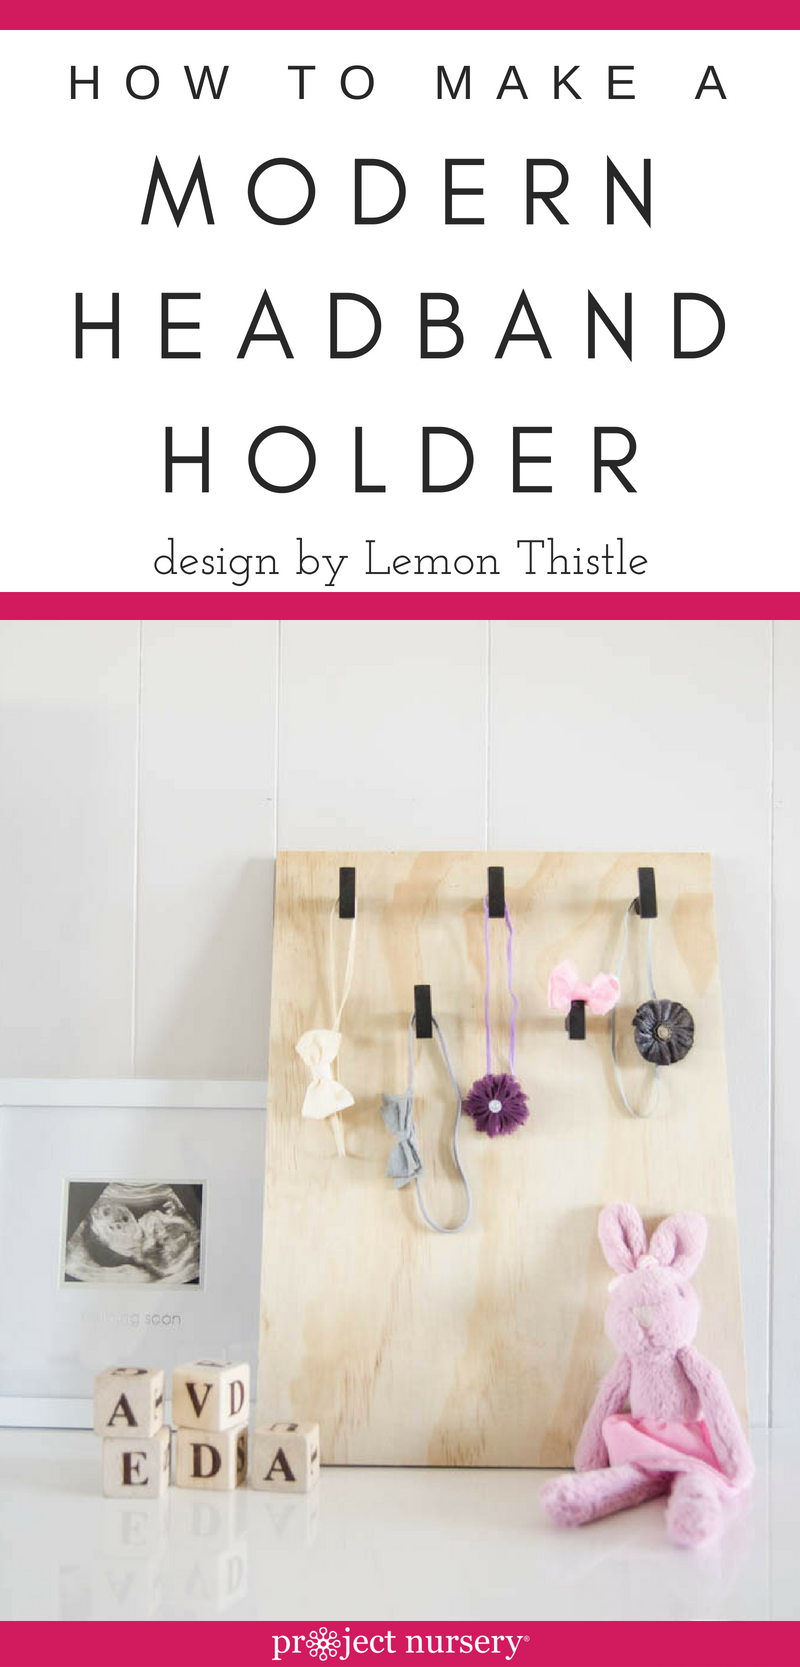 Personalized Gifts For Her - Lemon Thistle